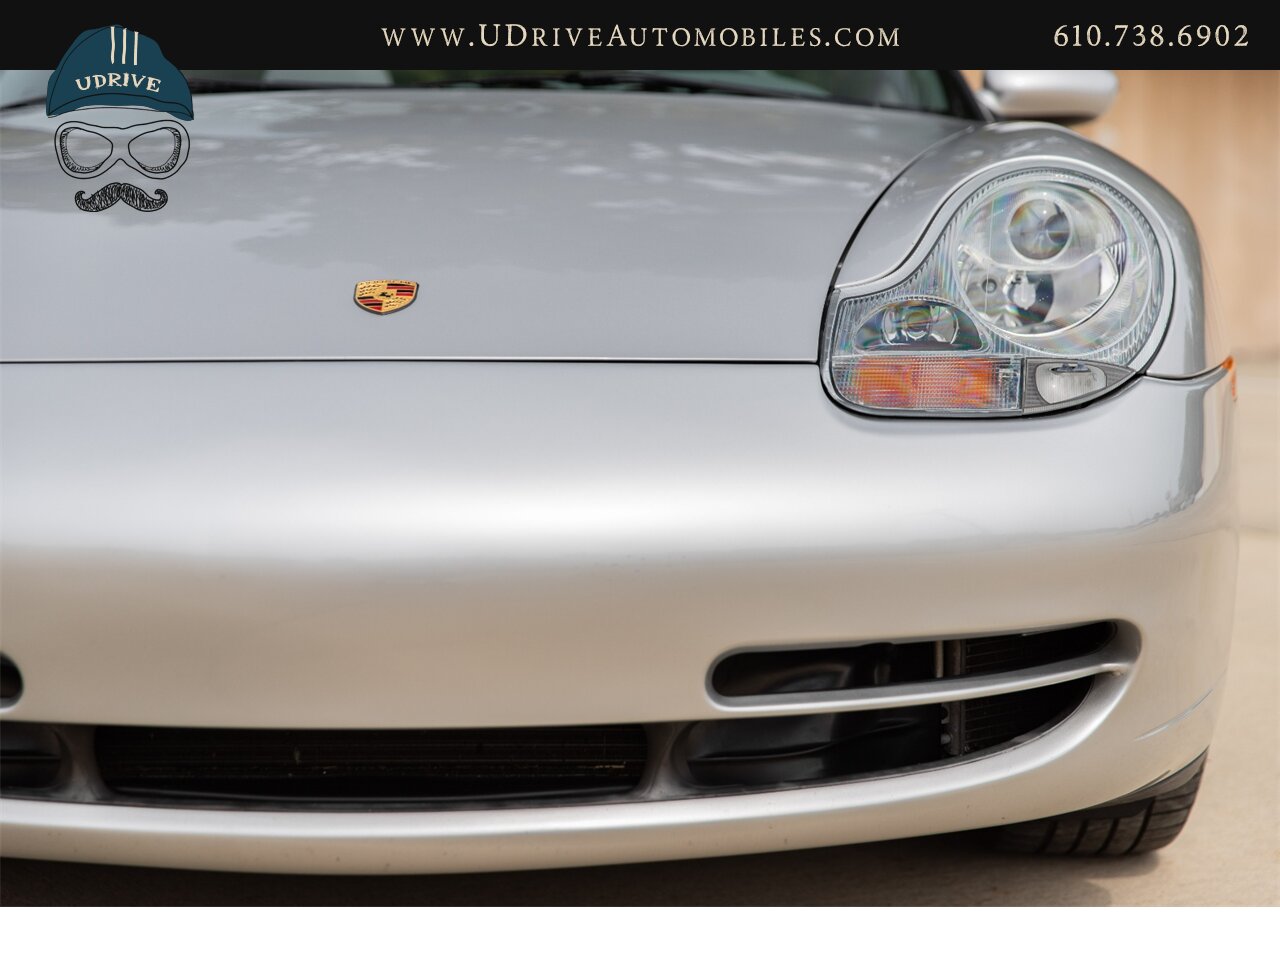 2001 Porsche 911 Carrera 4 Cabriolet Tiptronic IMS Upgrade  Power Seats 18in Turbo Look Wheels 2 Owners $5k Recent Service - Photo 14 - West Chester, PA 19382